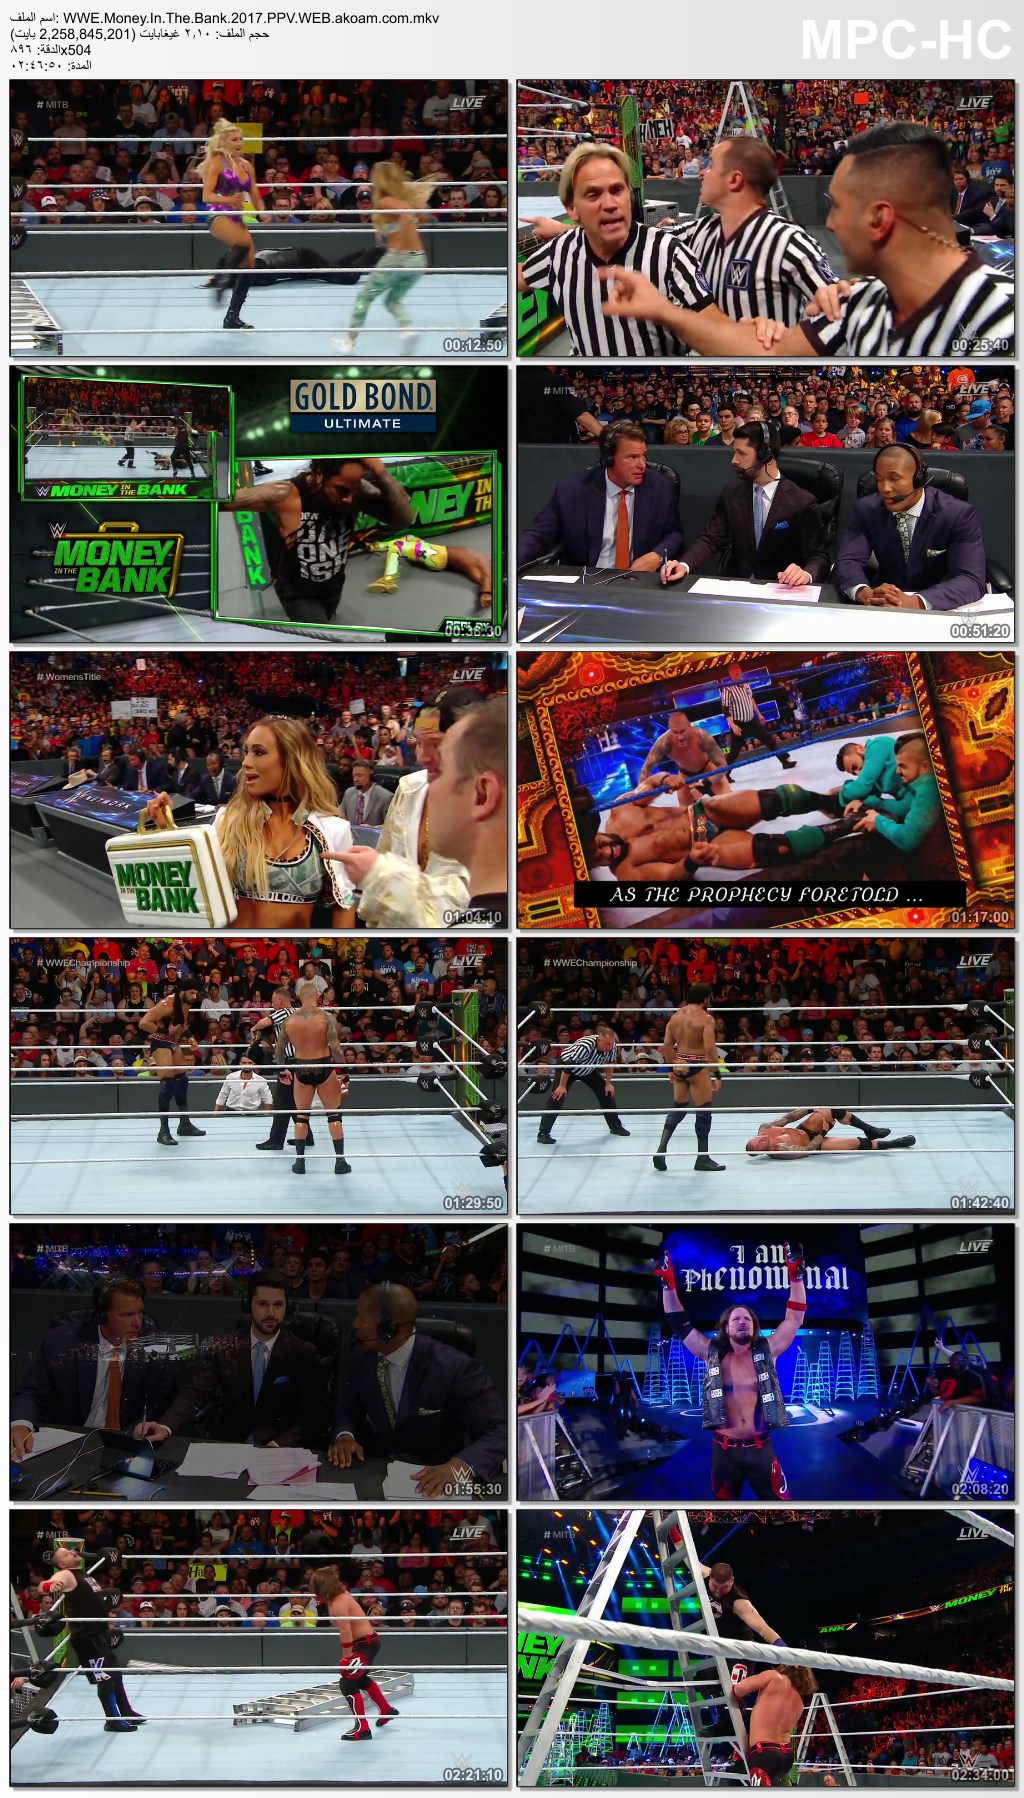 WWE Money in the Bank 2017,موني ان ذا بانك,موني ان ذا بانك 2017,WWE,Money In The Bank